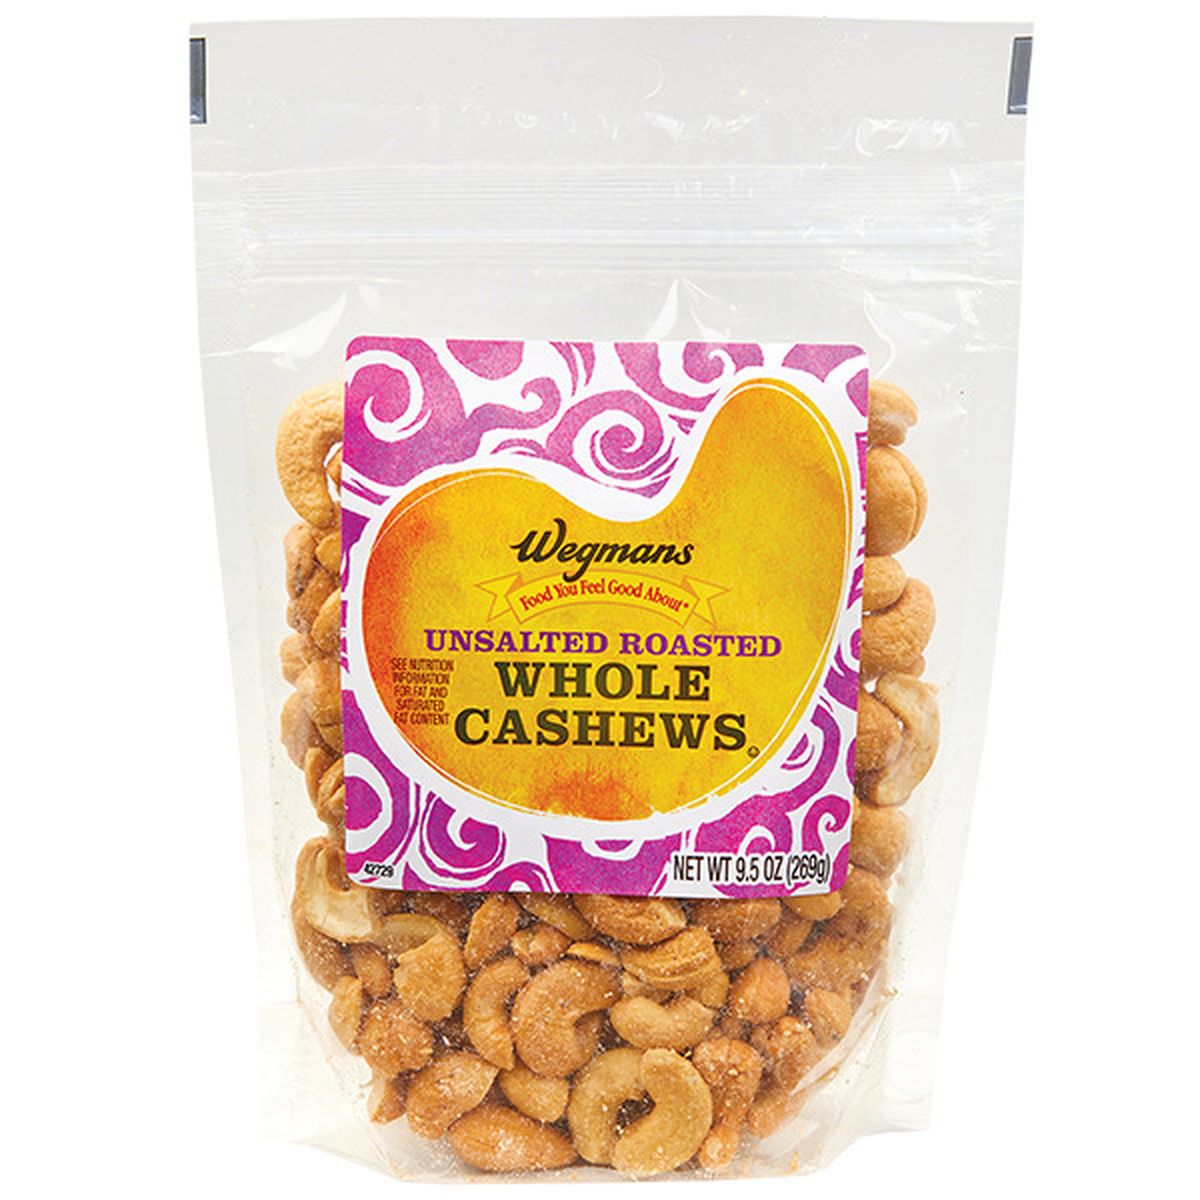 Calories in Wegmans Unsalted Roasted Whole Cashews